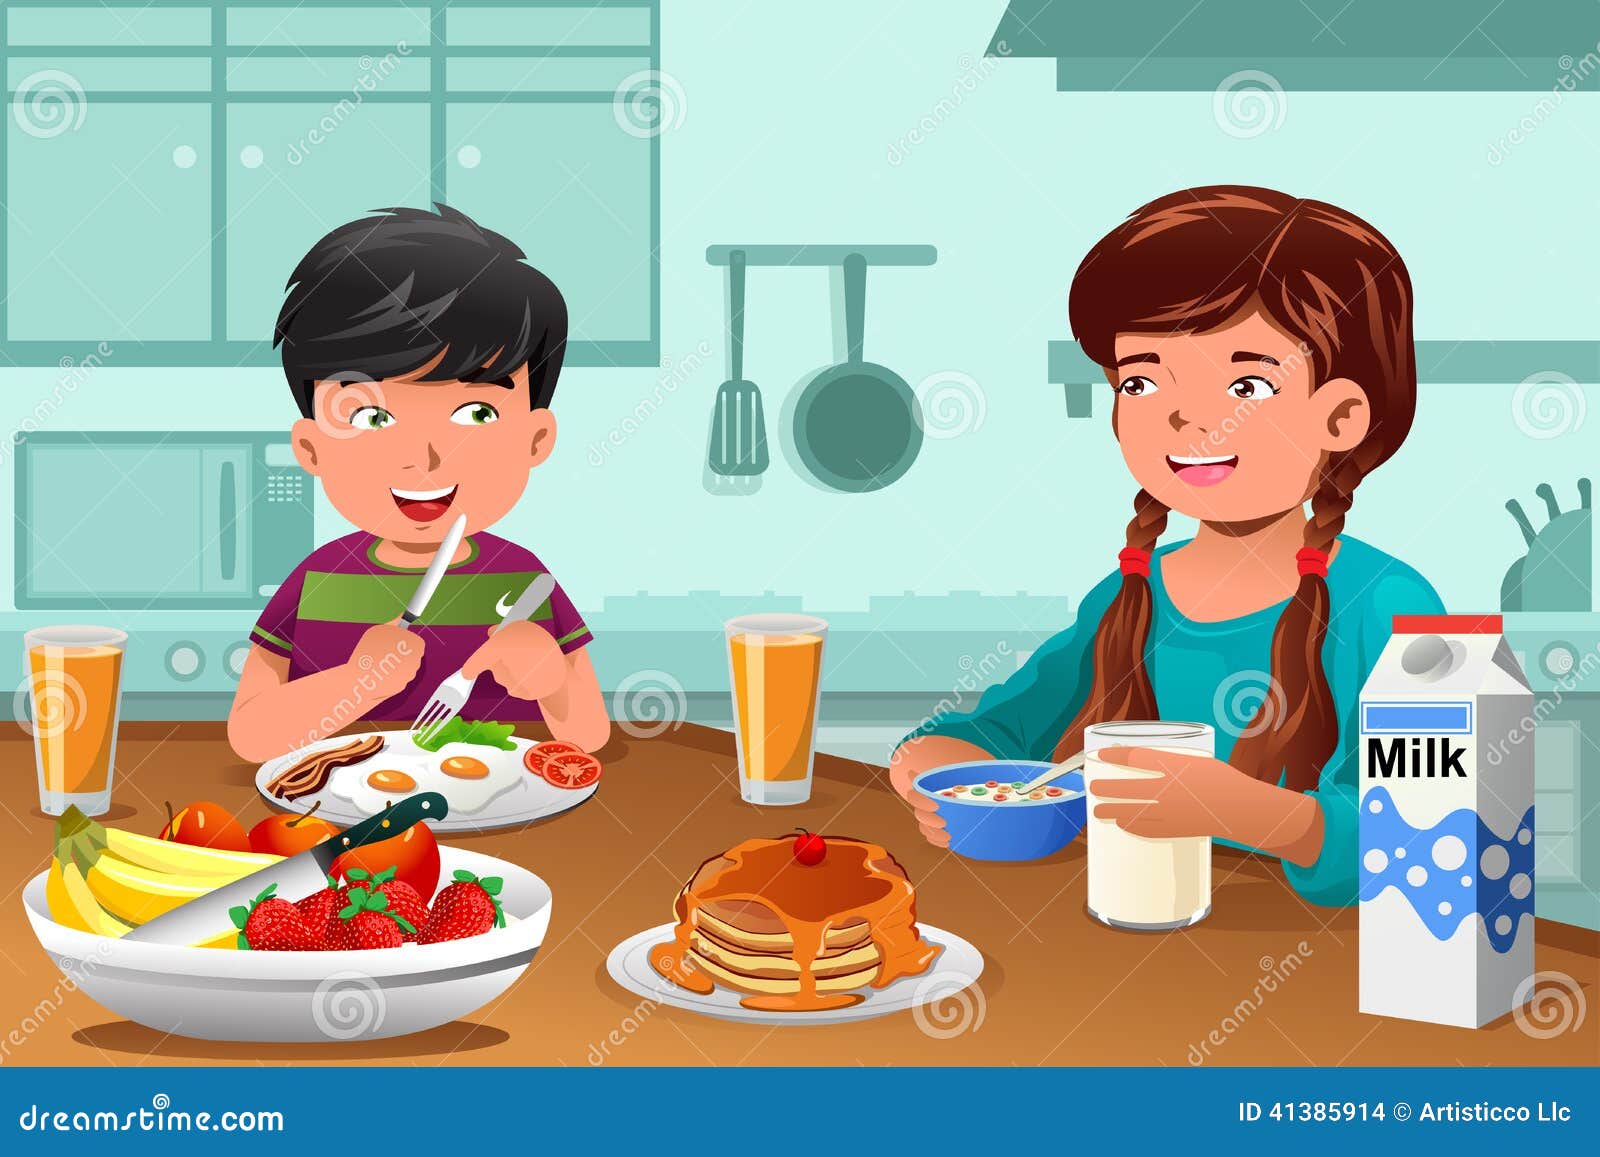 vector illustration of happy kids eating healthy breakfast at home.